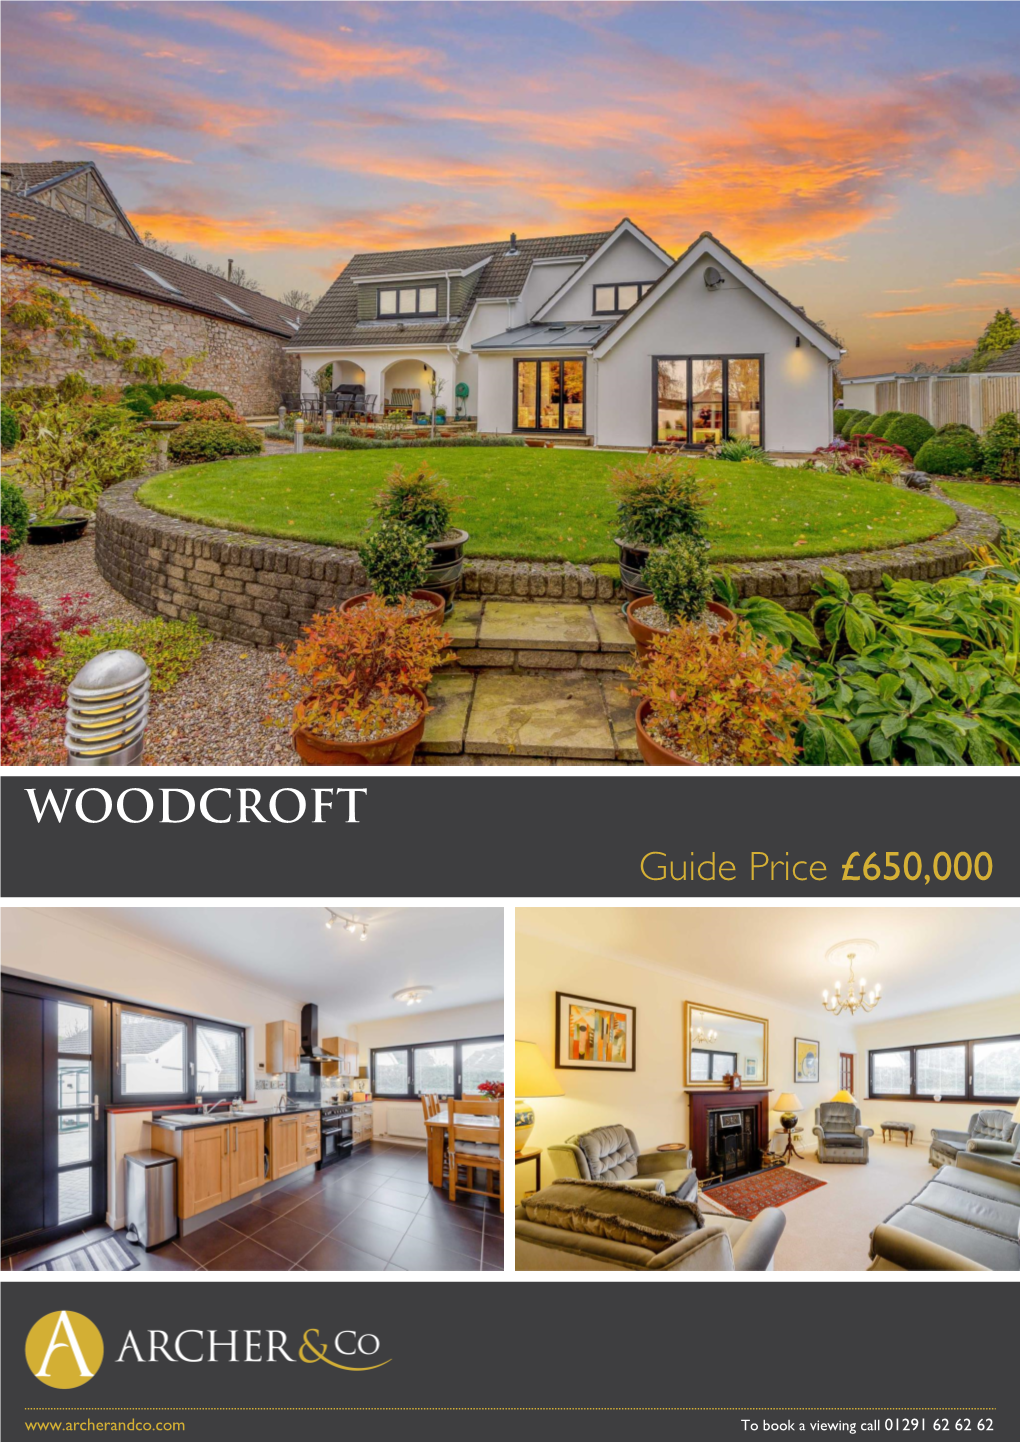 WOODCROFT Guide Price £650,000